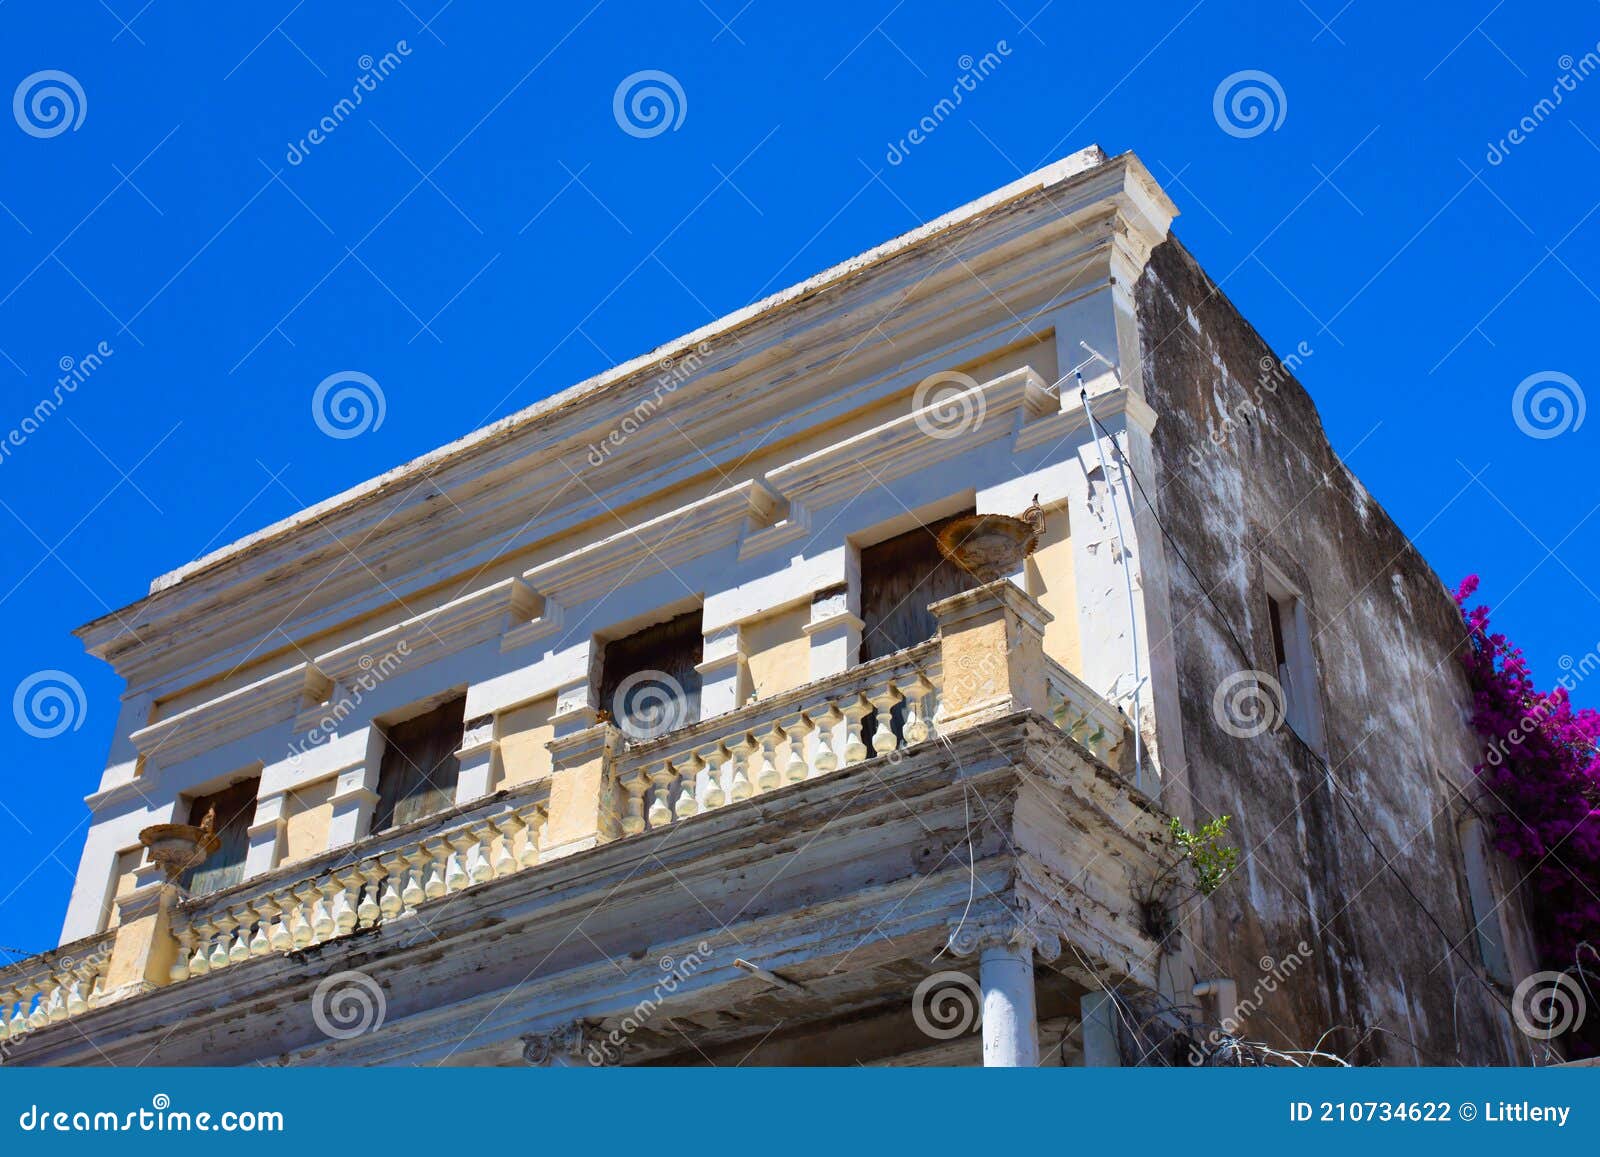 building in disrepair with typical caribbean architecture